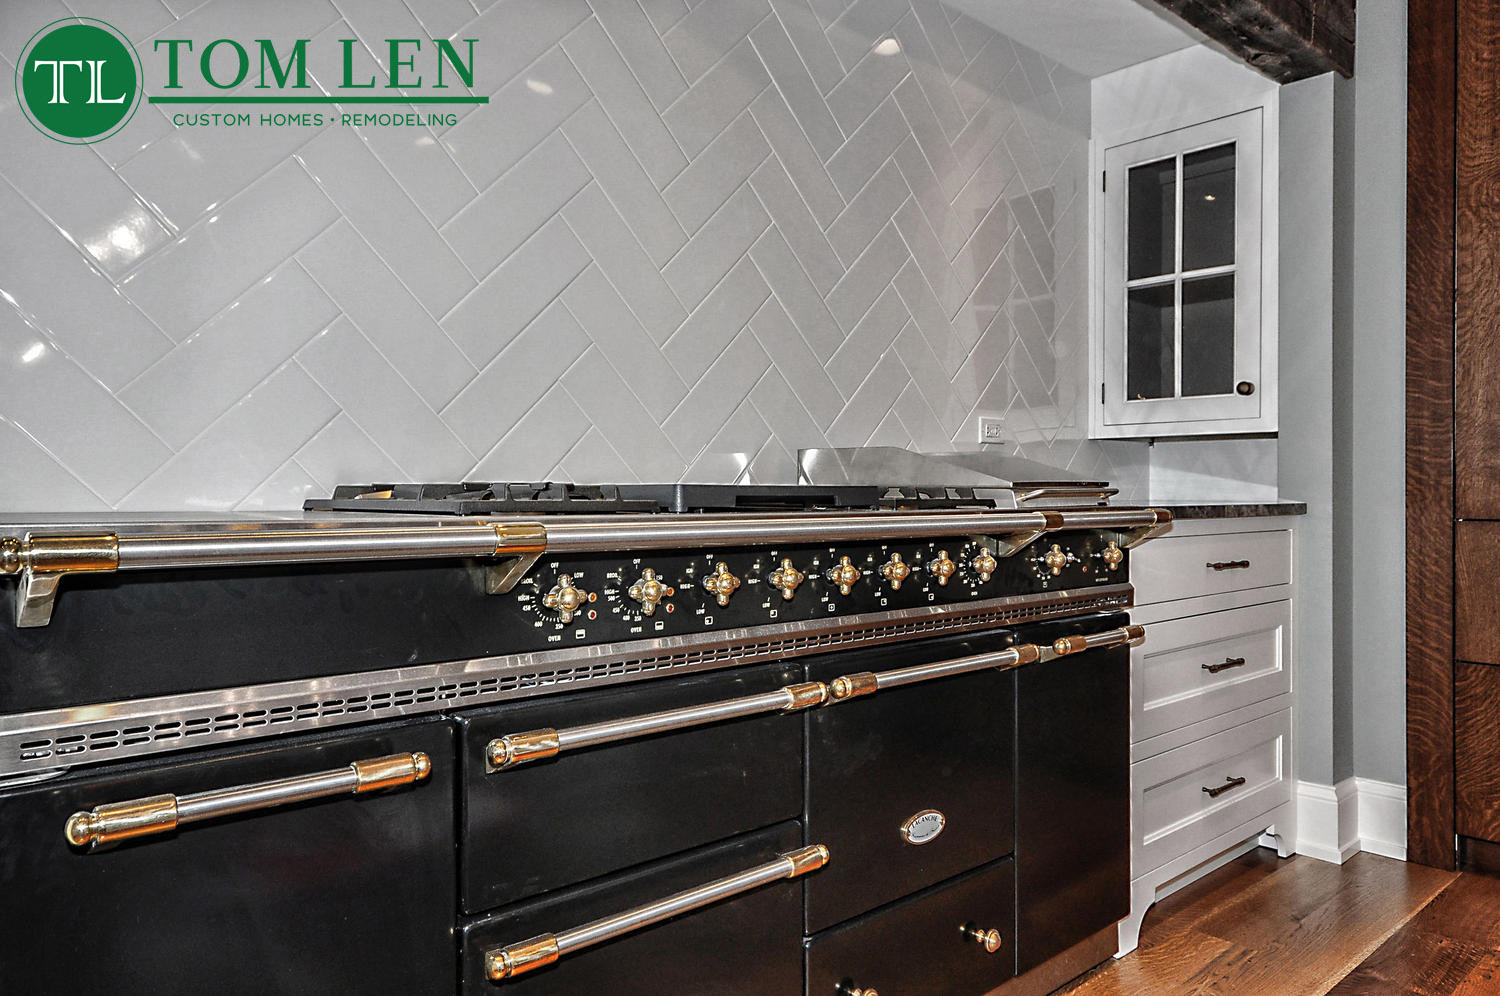 Essentials for Creating Your Luxury Kitchen - Tom Len Custom Homes